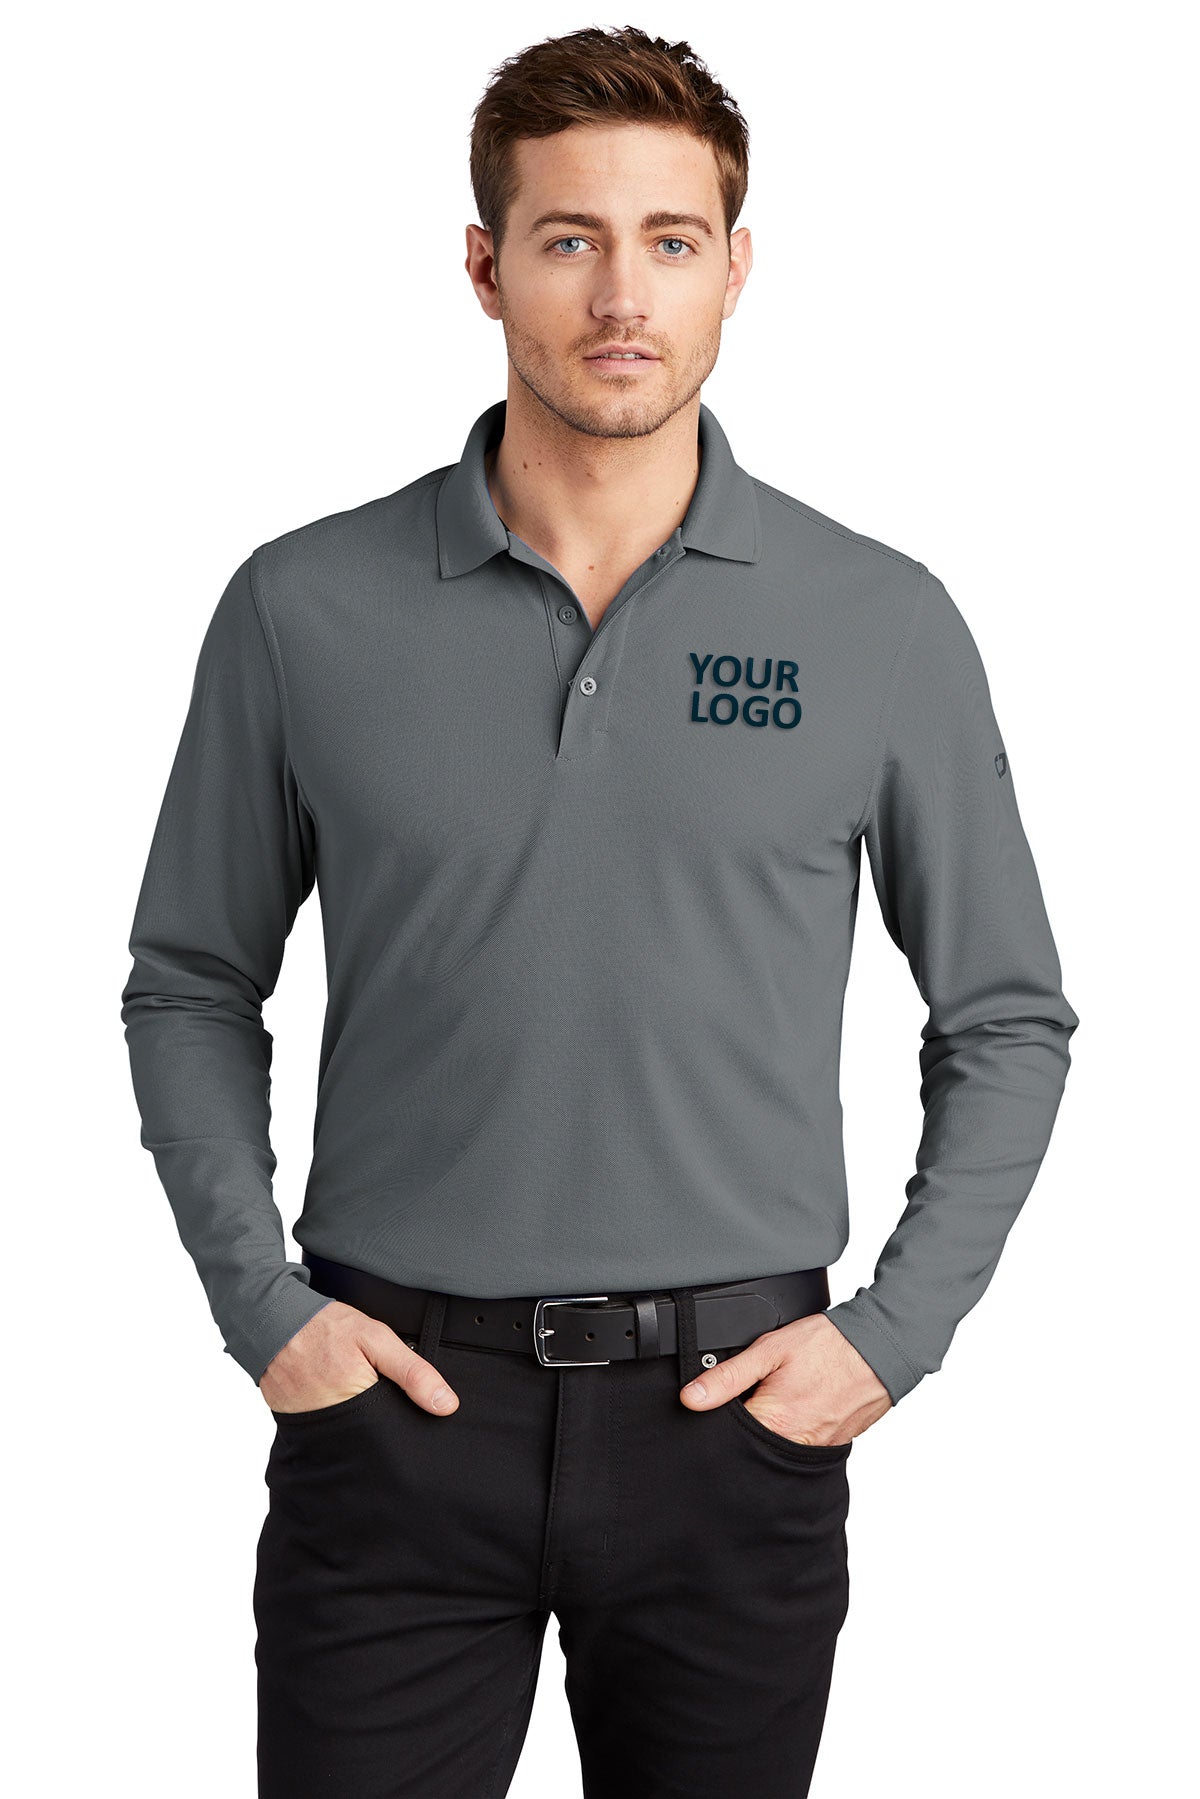 OGIO Diesel Grey OG105 polo shirt with logo embroidered